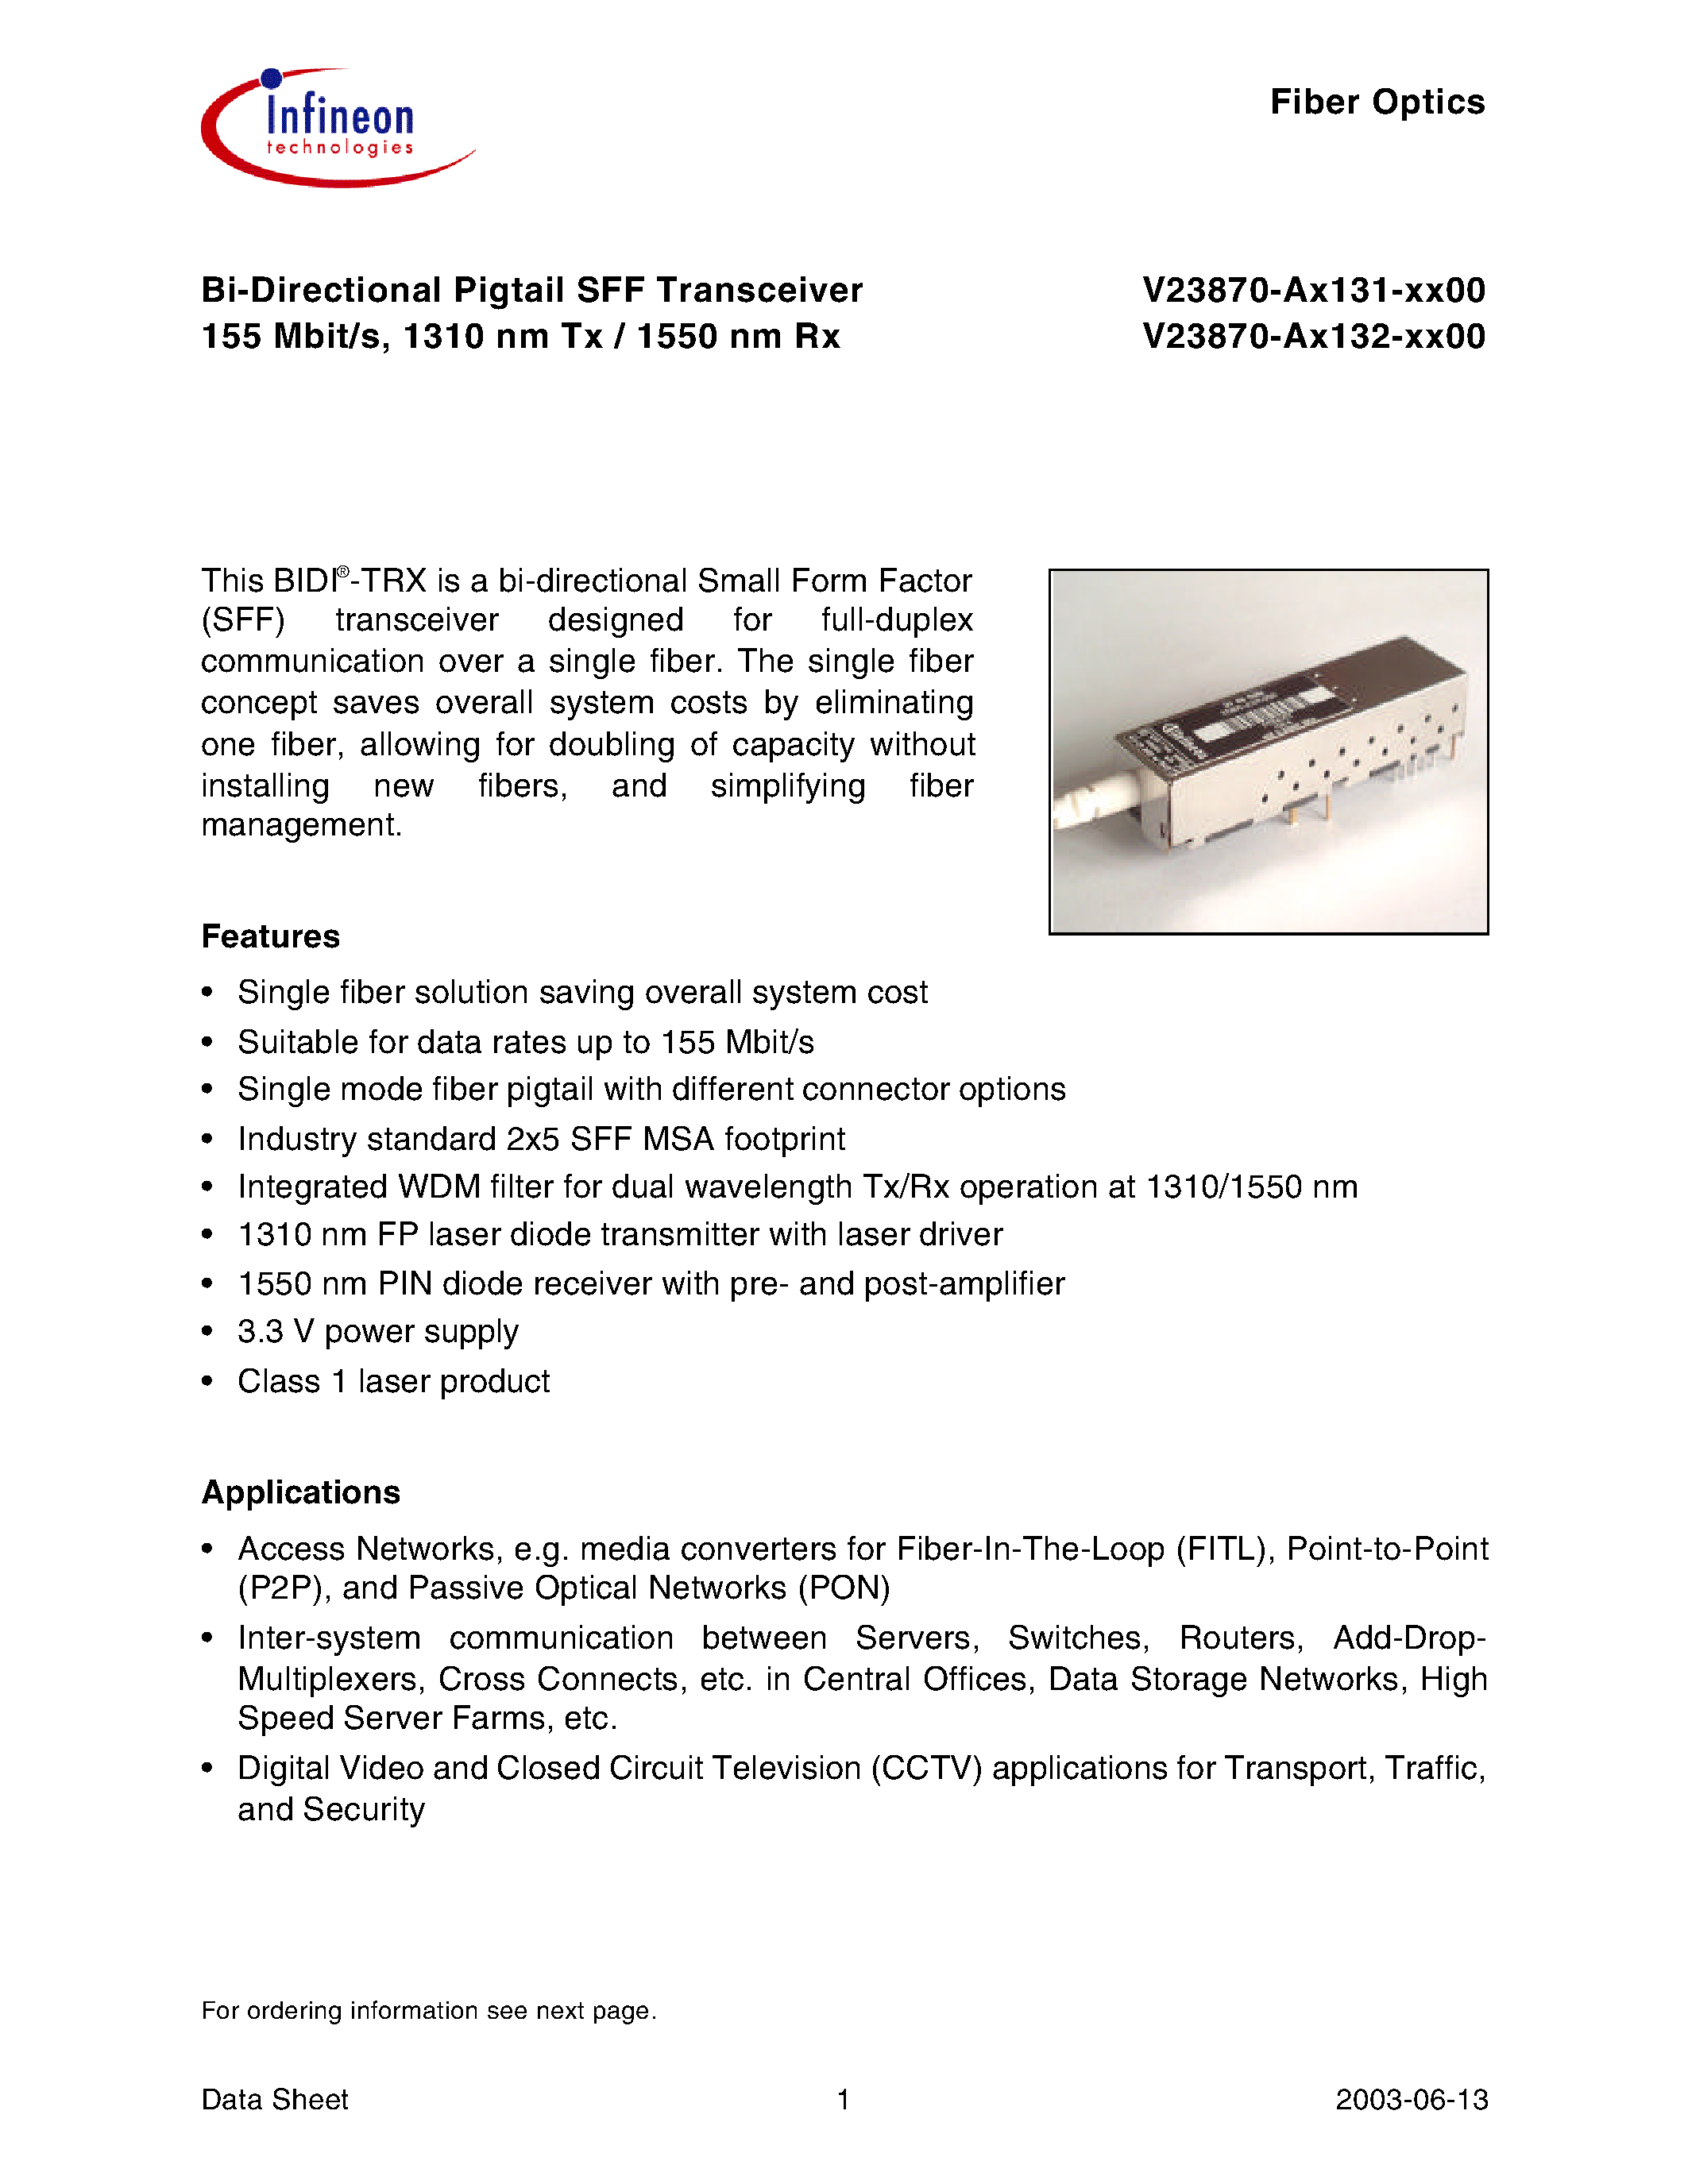 Datasheet V23870-A3132-B200 - Bi-Directional Pigtail SFF Transceiver 155 Mbit/s/ 1310 nm Tx / 1550 nm Rx page 1